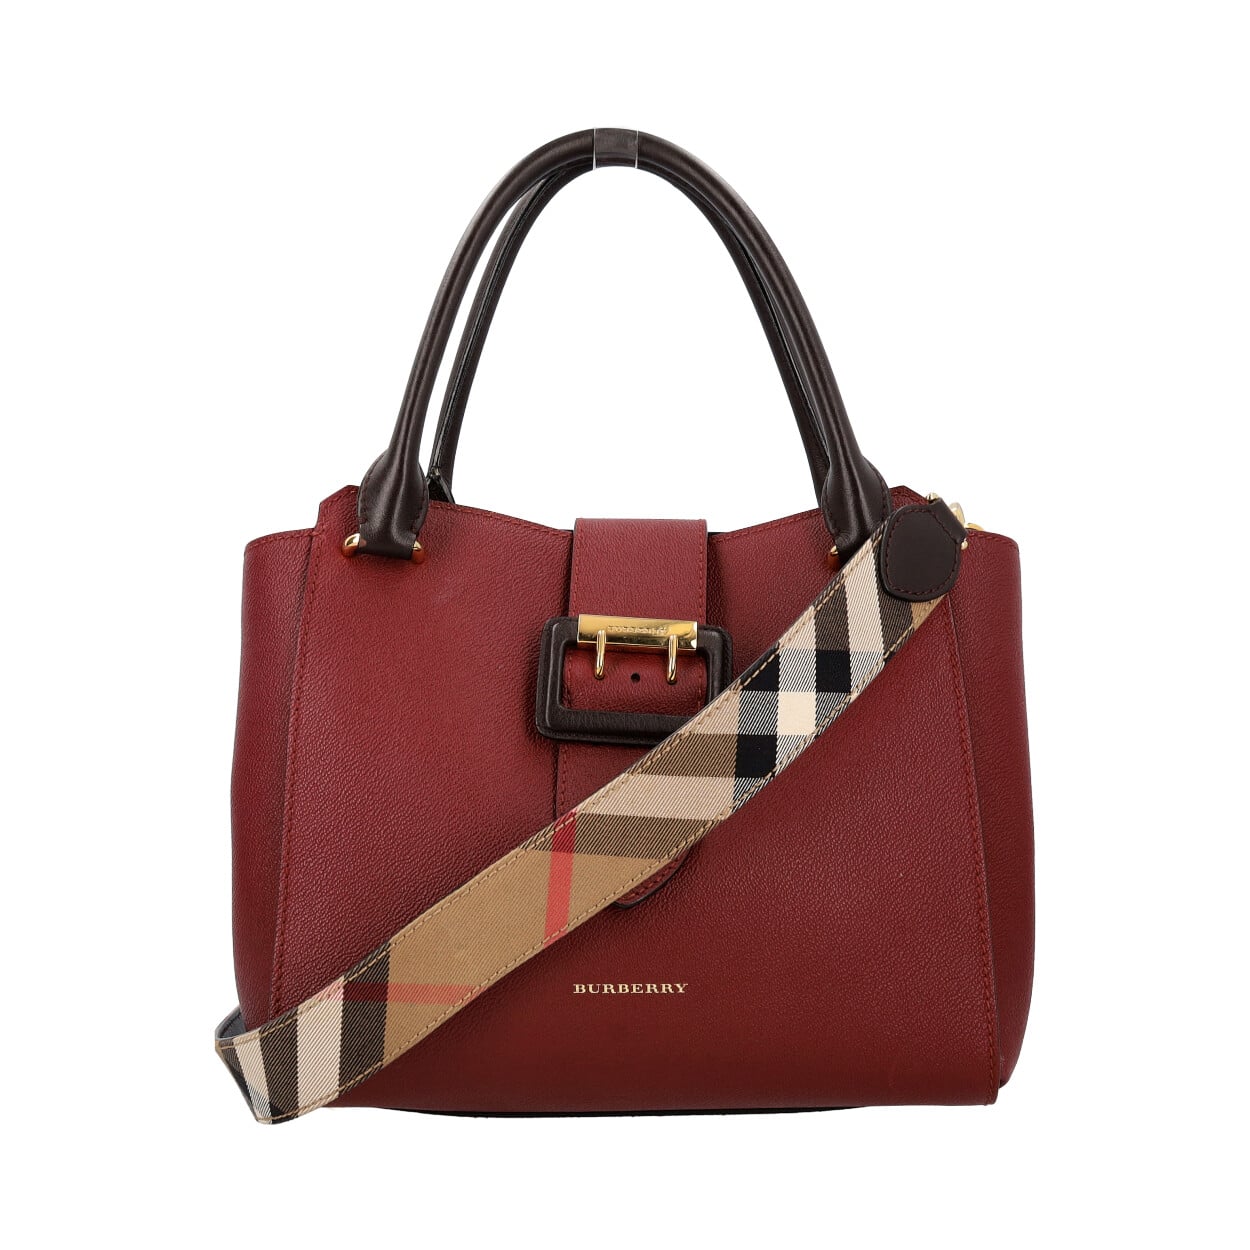 BURBERRY Leather Medium Buckle Tote Burgundy/Black | Luxity